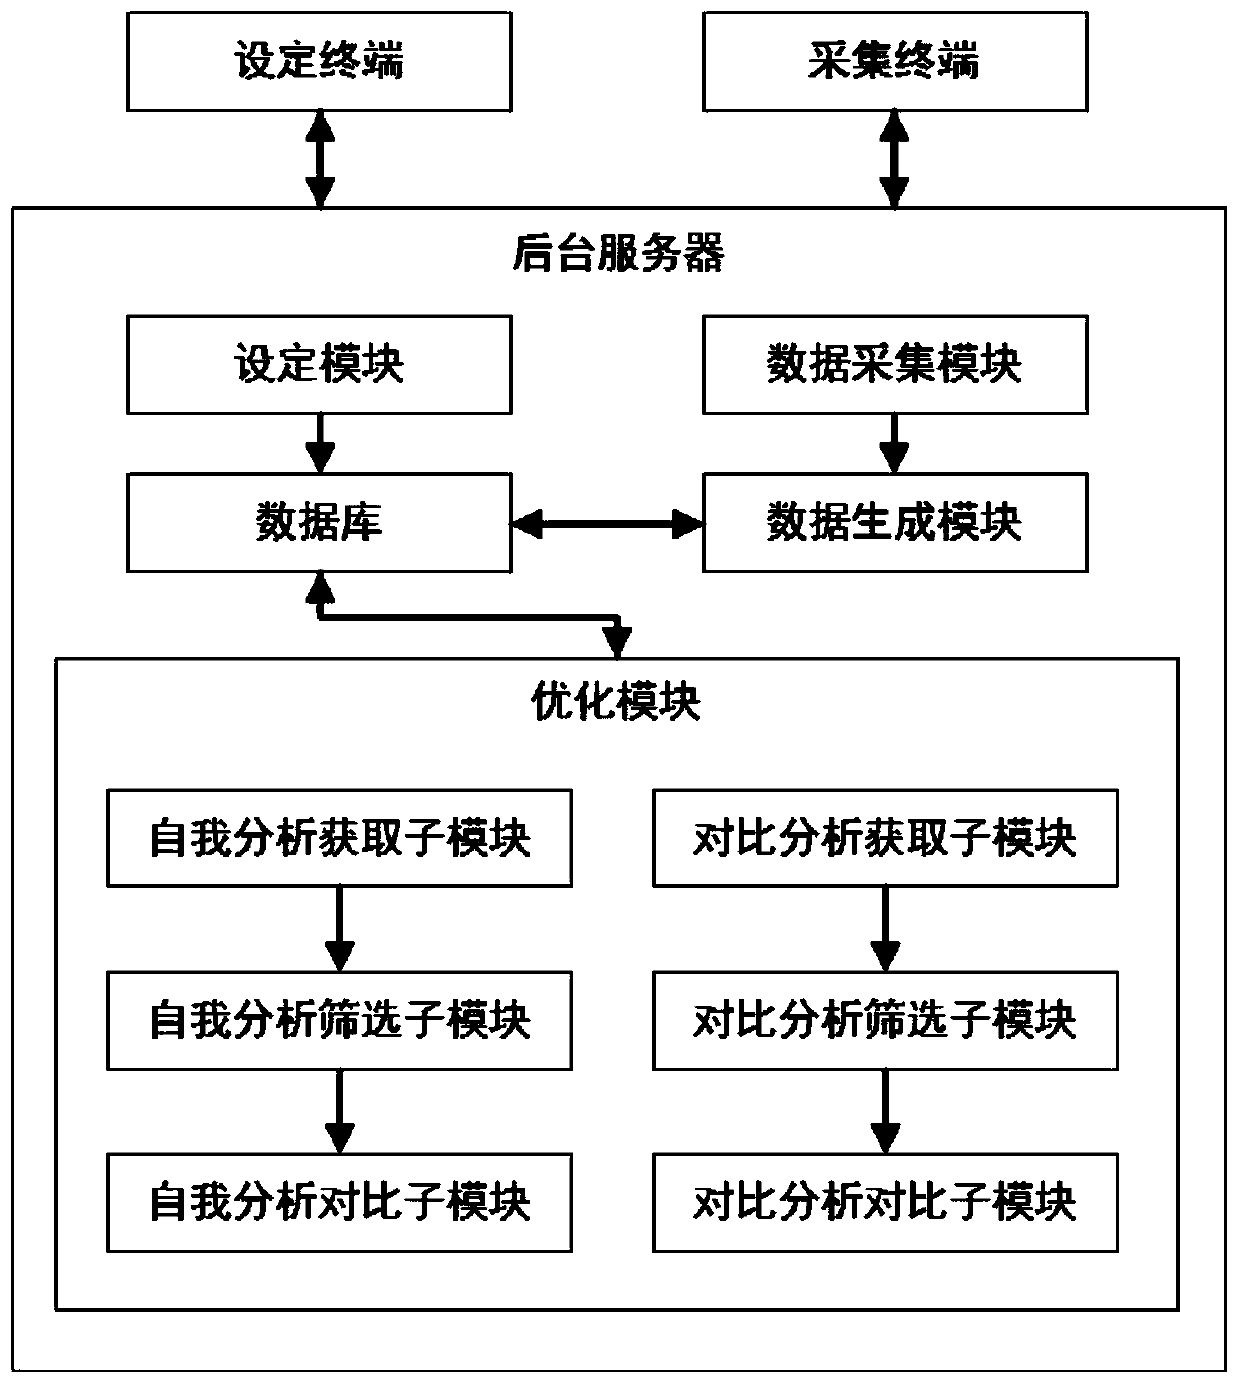 Cost optimization management system and method